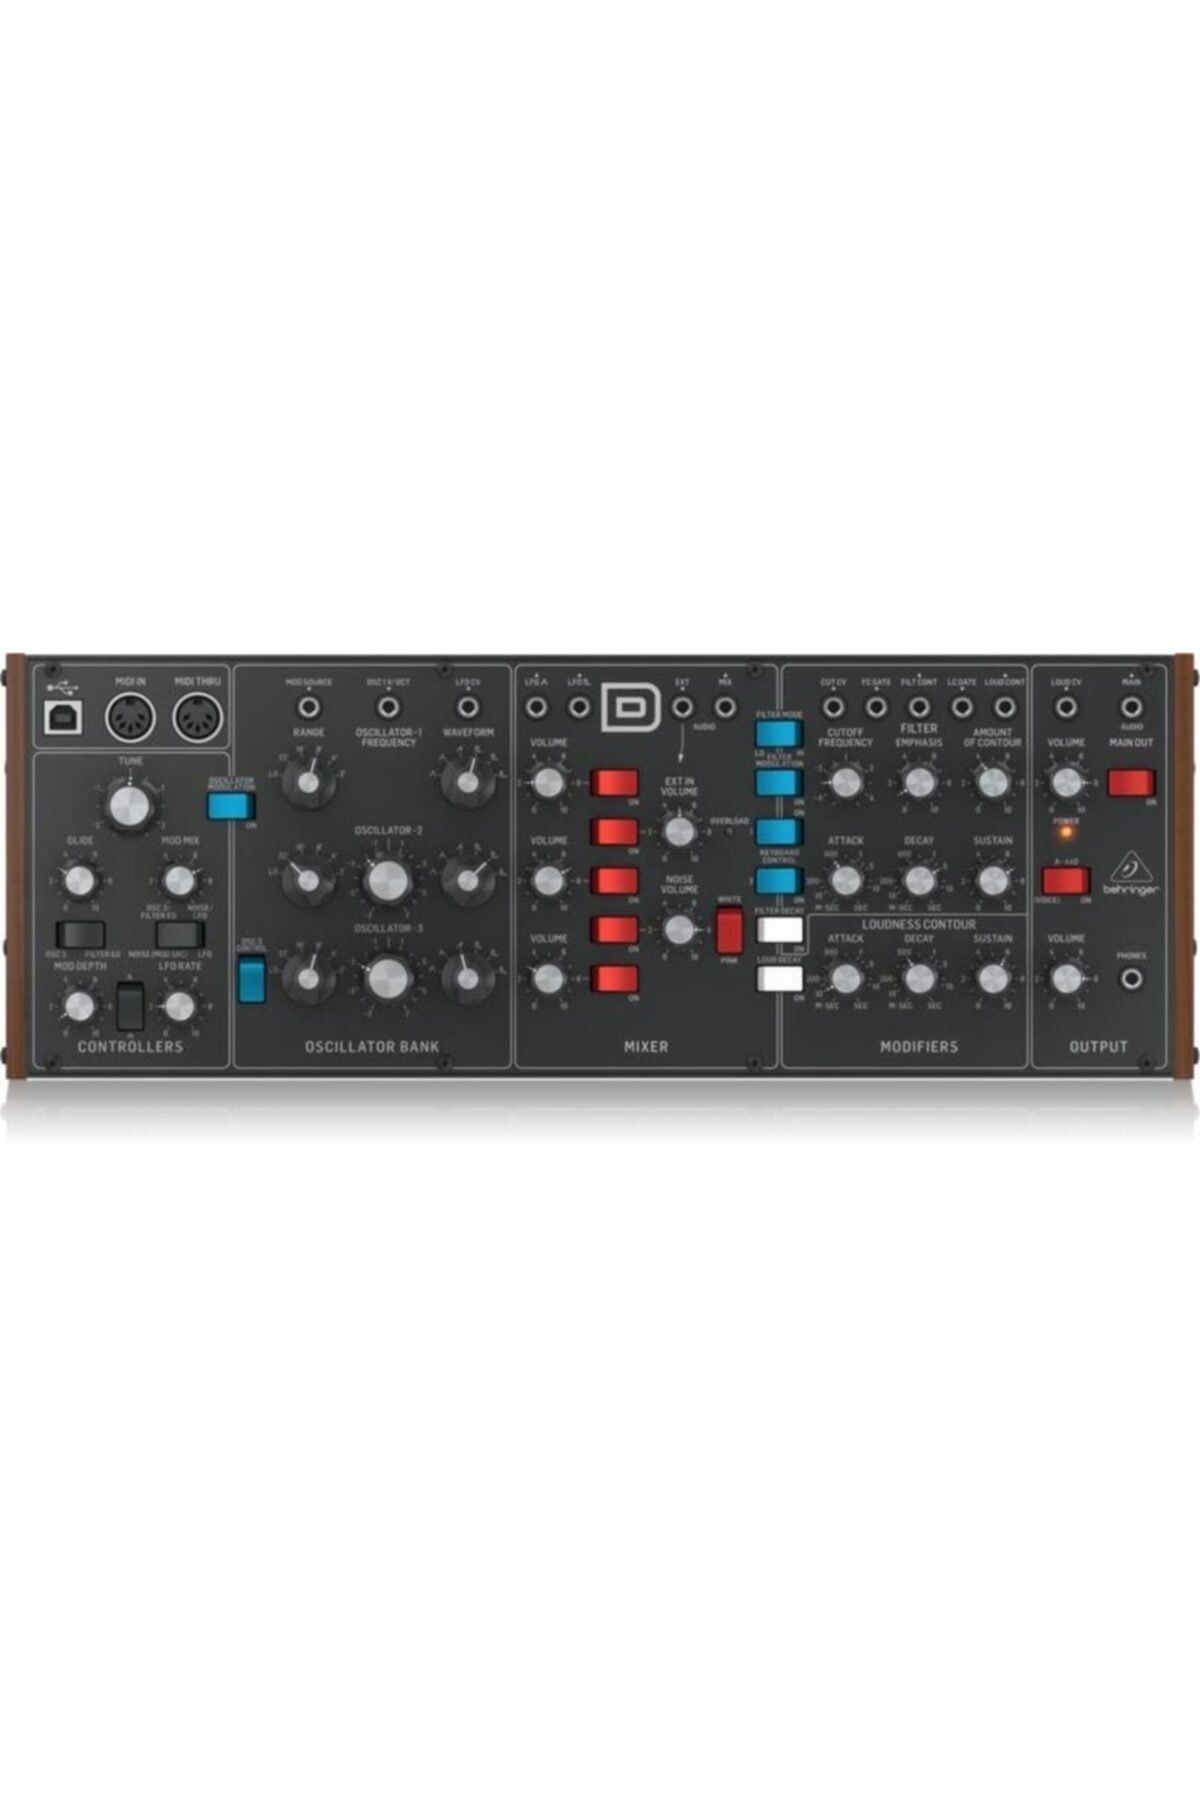 Behringer Model D Authentic Analog Synthesizer With 3 Vcos, Ladder Filter, Lfo And Eurorack Format